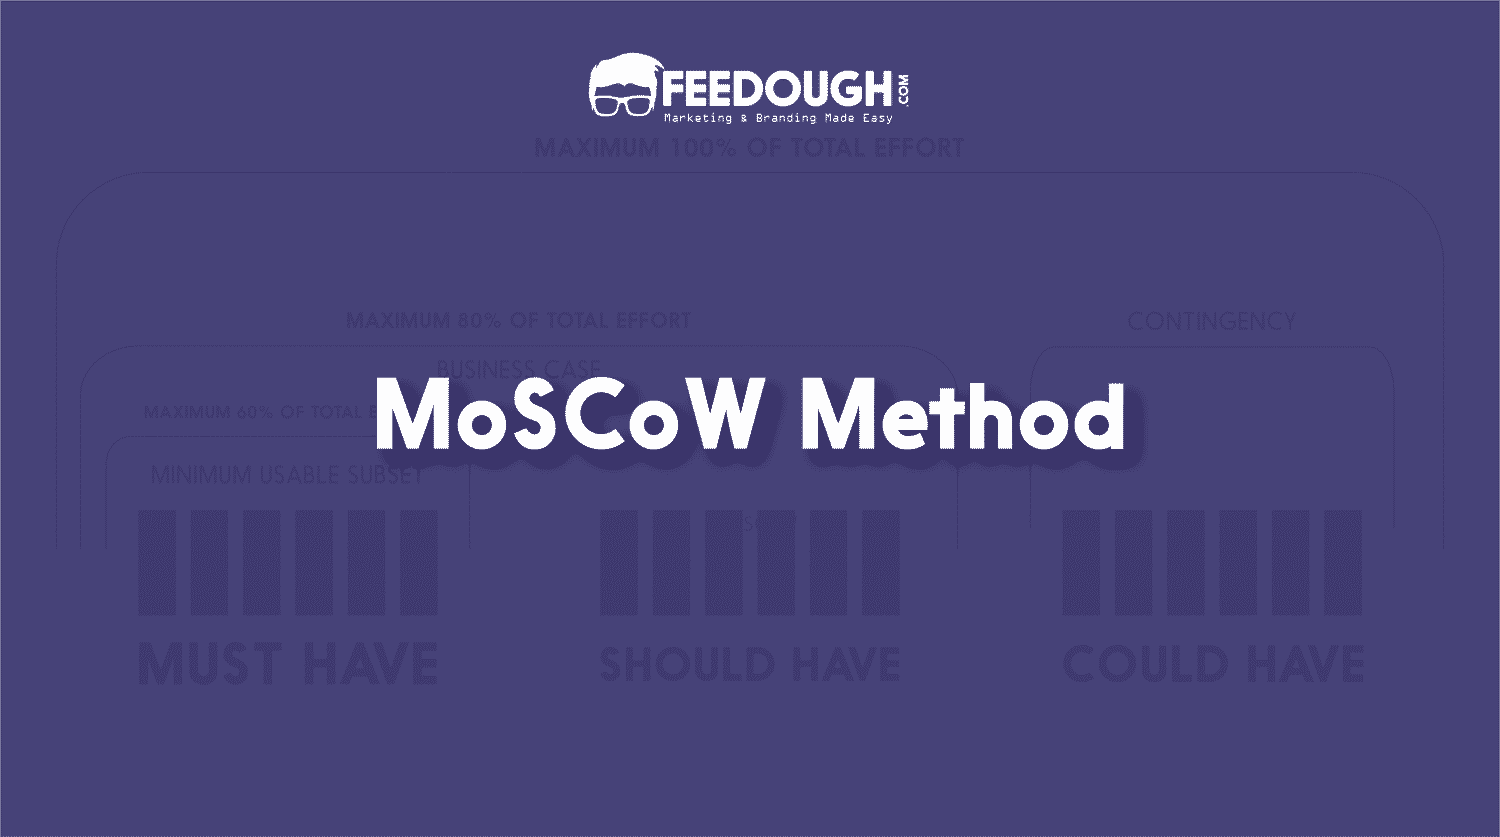 MoSCoW Method Explained